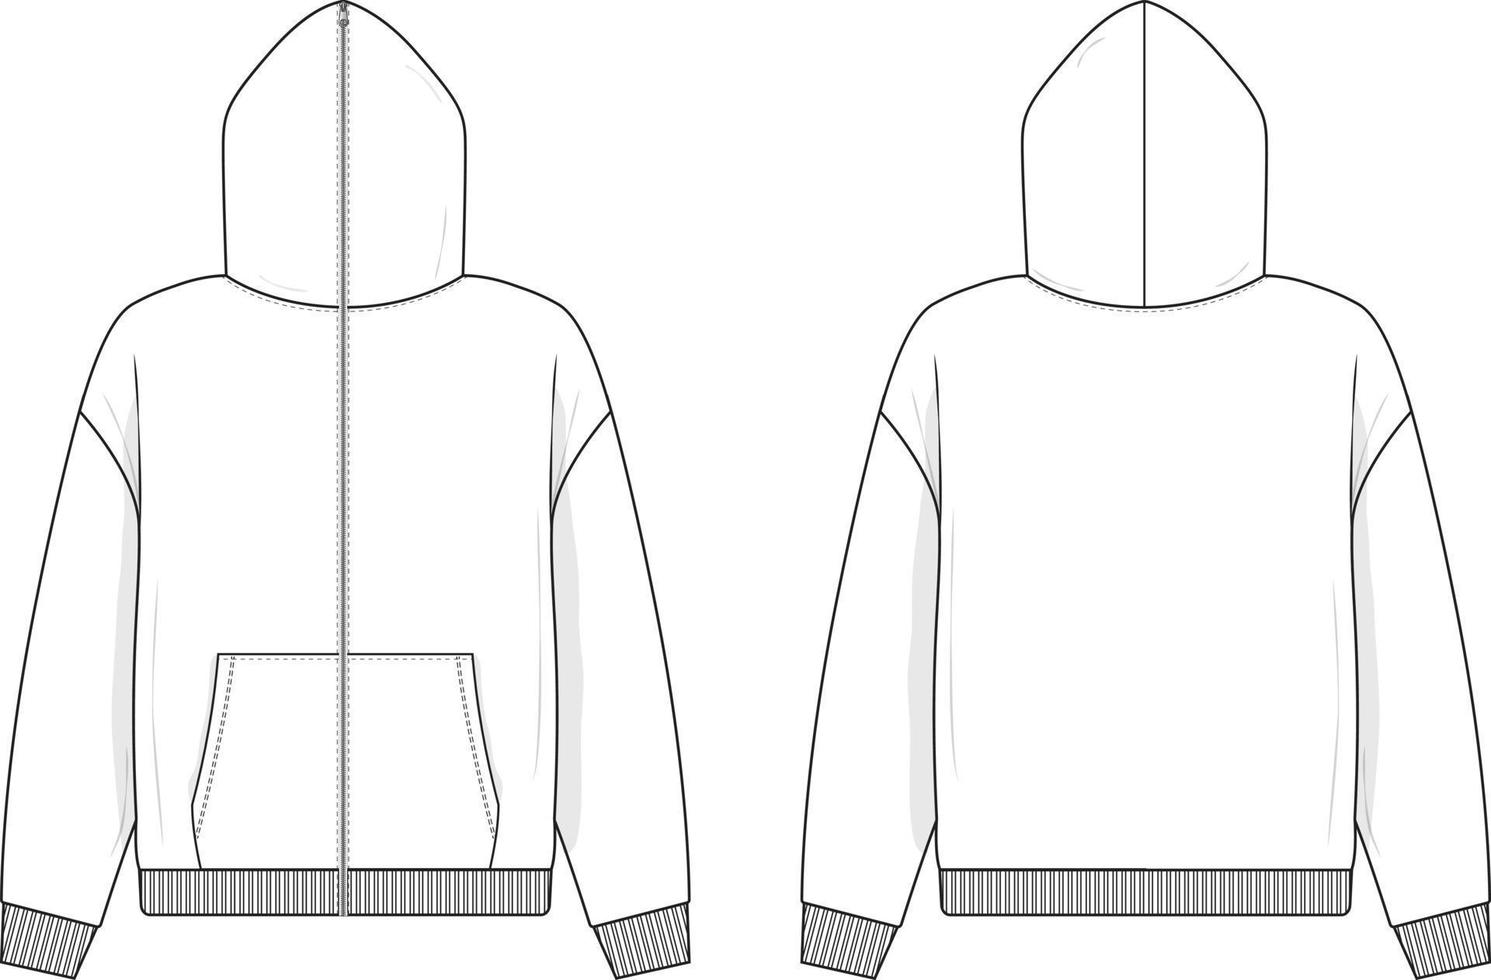 Full zip hoodie sweatshirt flat technical drawing illustration mock-up template for design and tech packs men or unisex fashion CAD streetwear vector